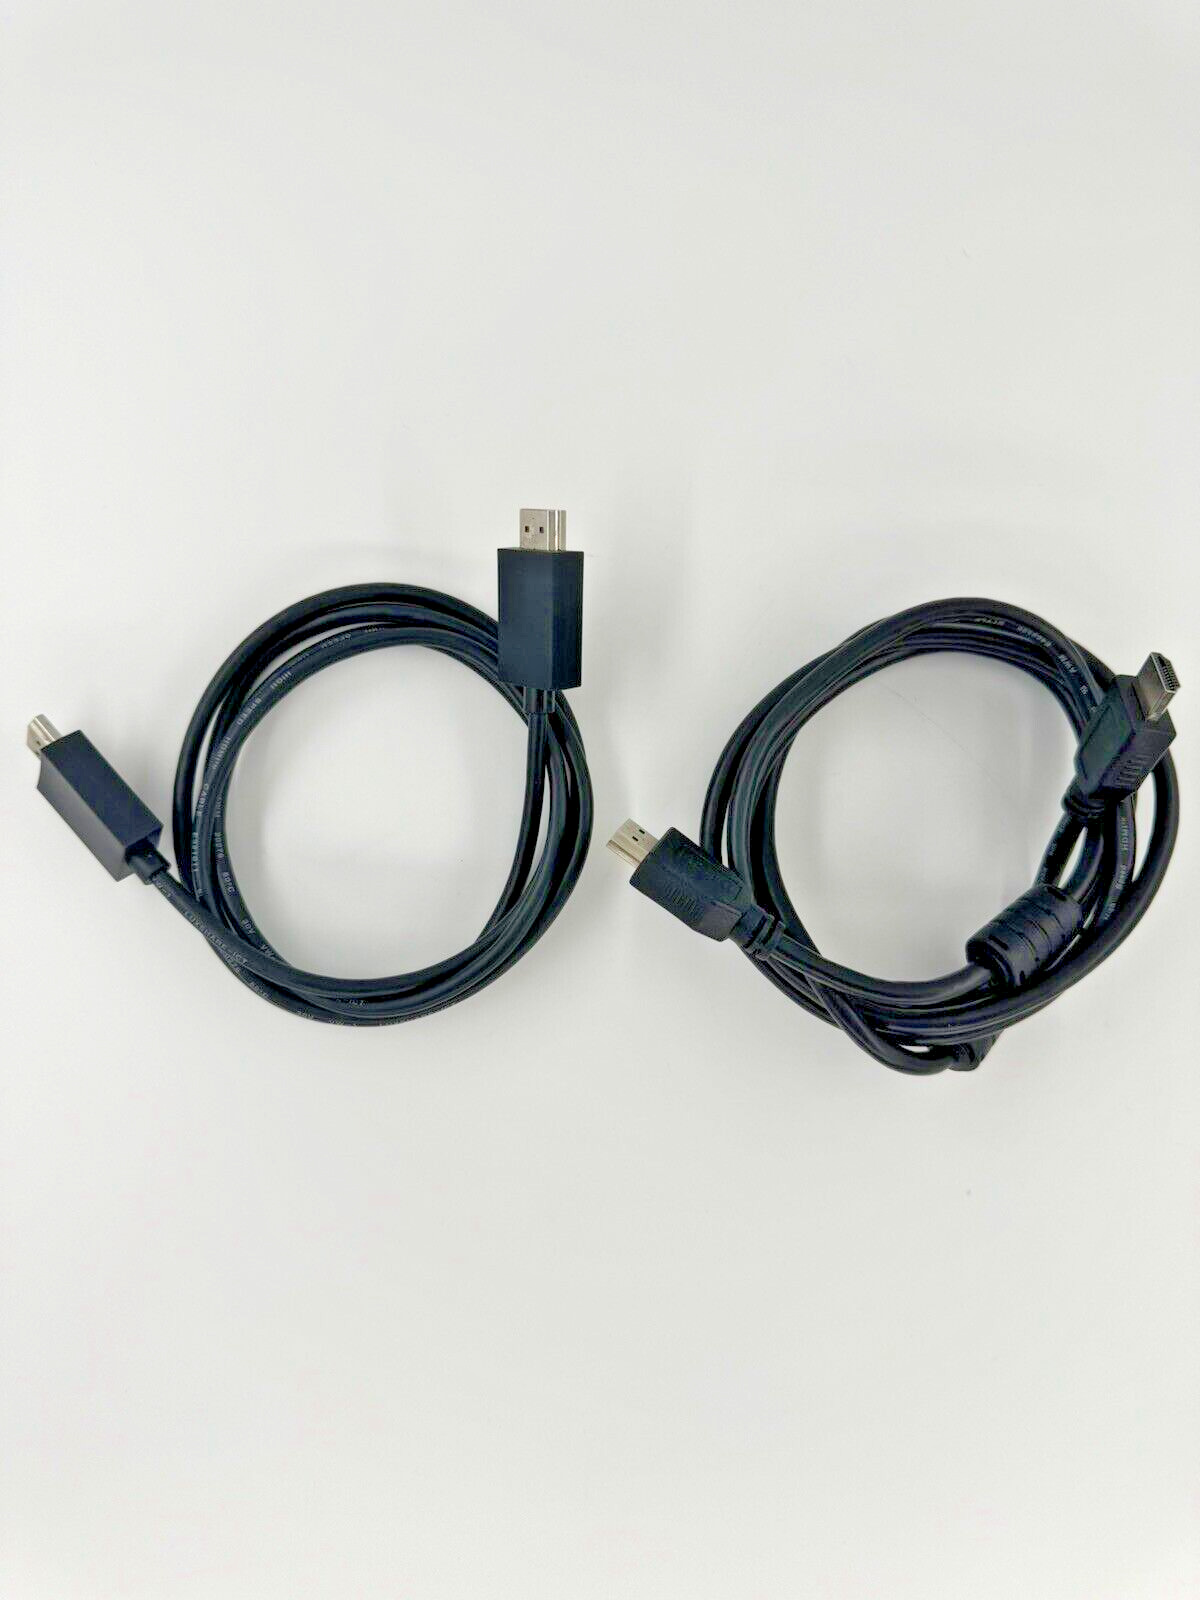 2 HDMI Cable - High Speed, 1.5M, AWM Style 20276, 80°C, 30V